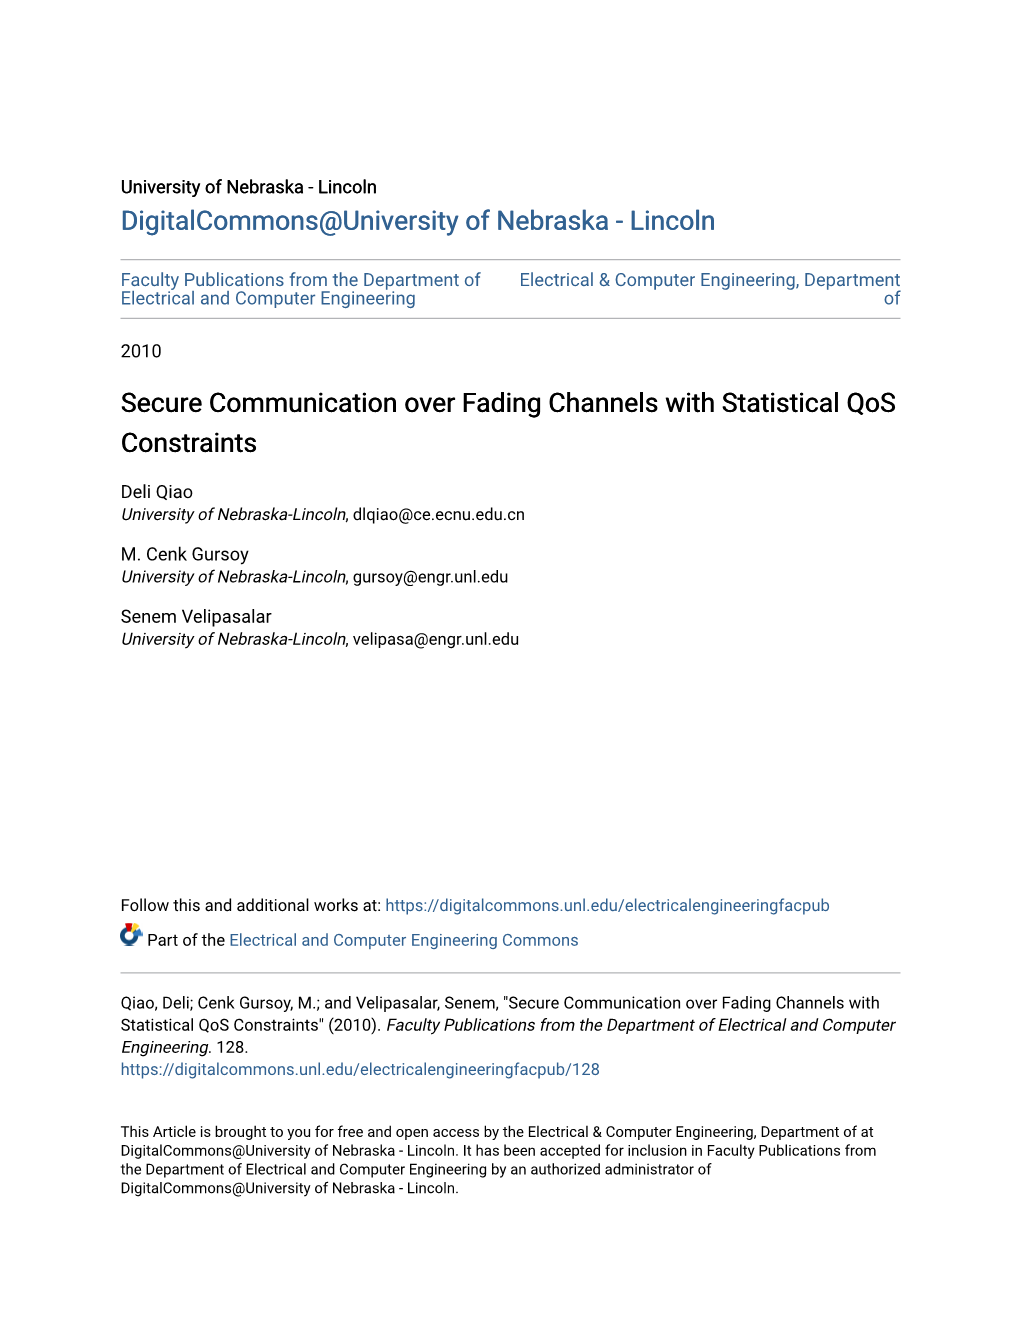 Secure Communication Over Fading Channels with Statistical Qos Constraints